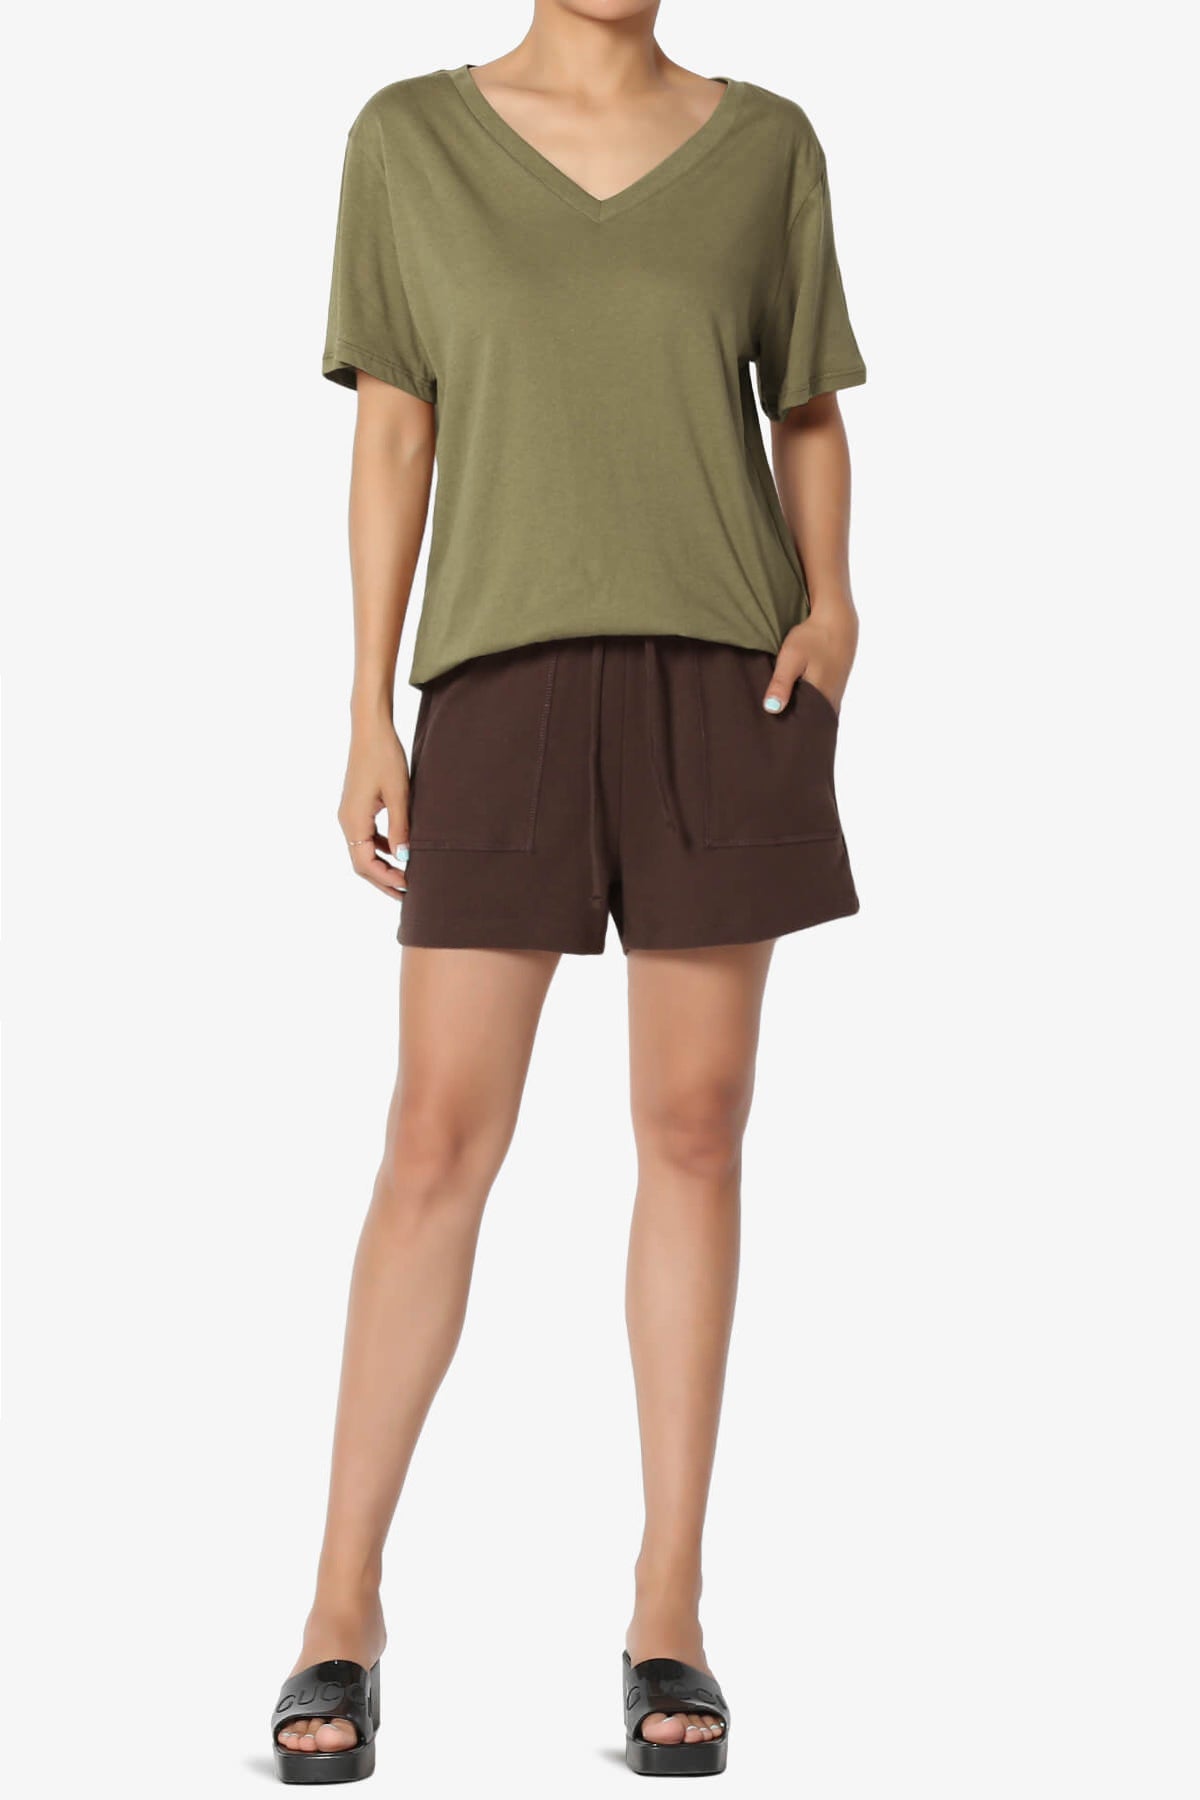 Load image into Gallery viewer, Mayra V-Neck Cotton Boyfriend Tee OLIVE KHAKI_6
